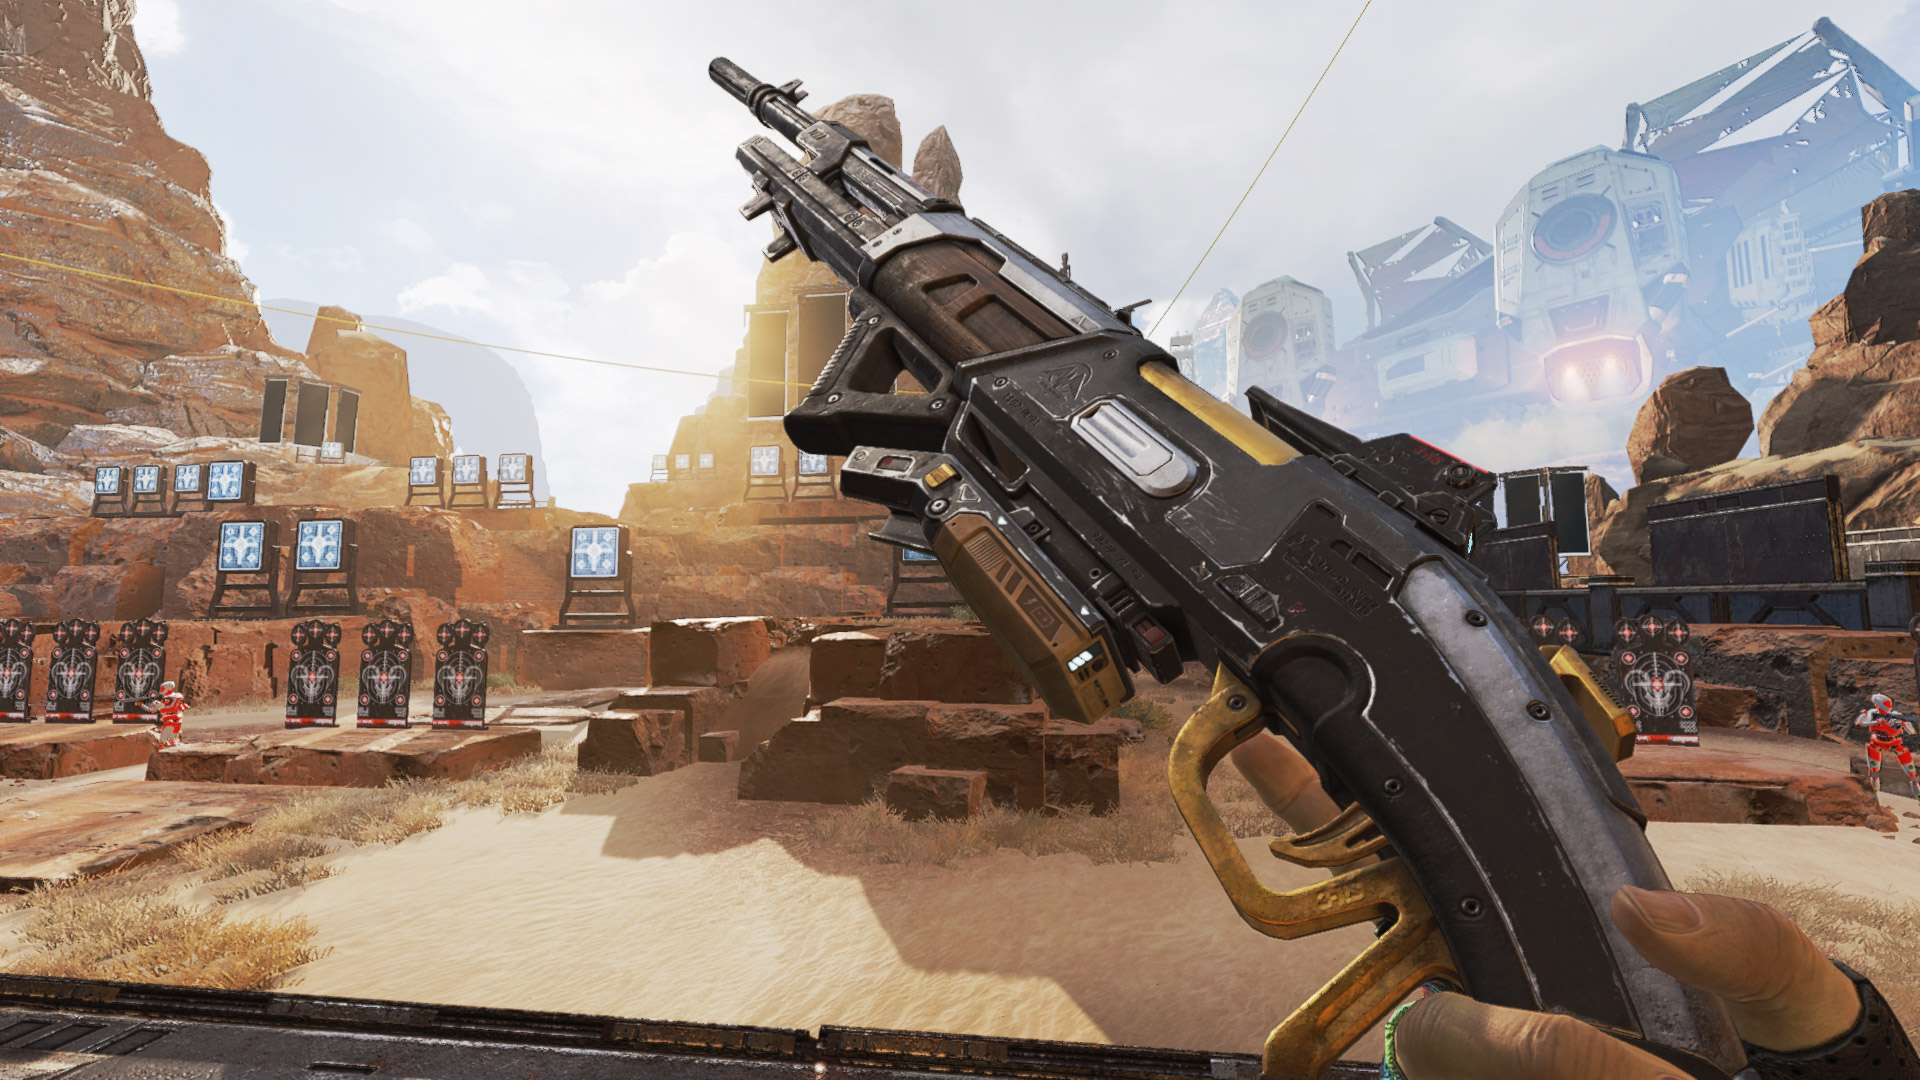 Apex Legends Weapons Tier List The Best Guns In The Battle Royale Game The Loadout